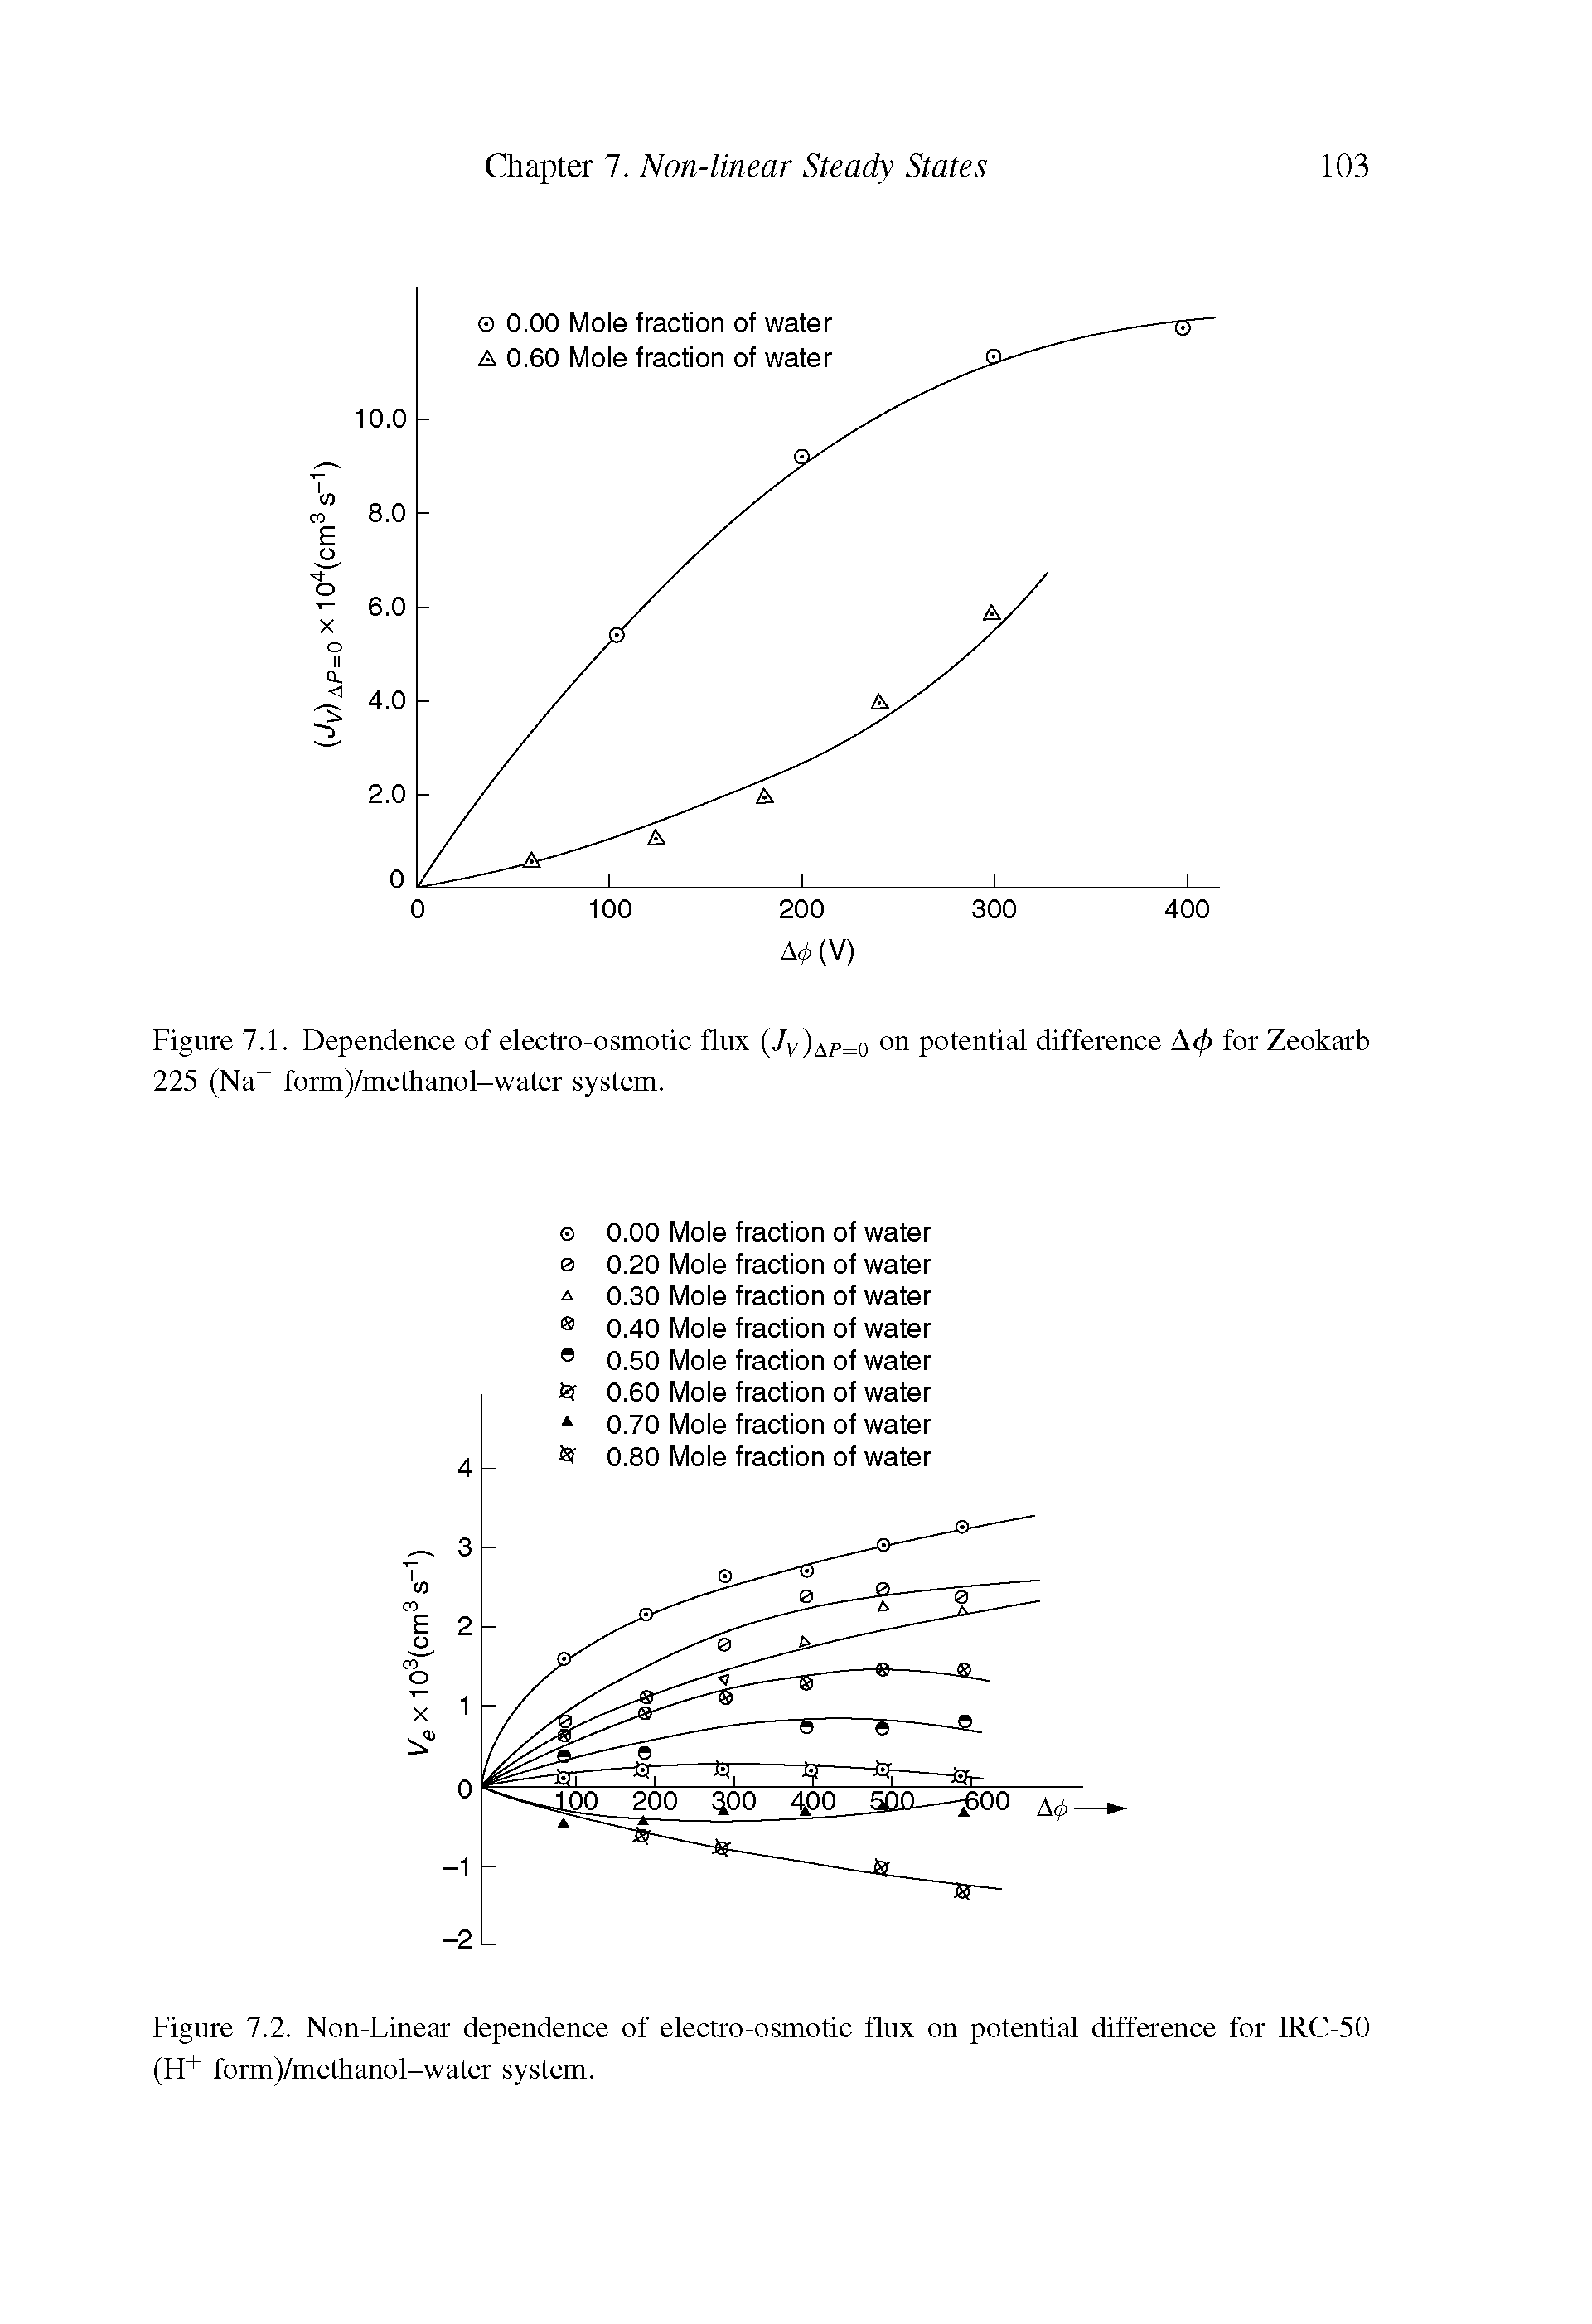 Figure 7.2. Non-Linear dependence of electro-osmotic flux on potential difference for IRC-50 (H+ form)/methanol-water system.